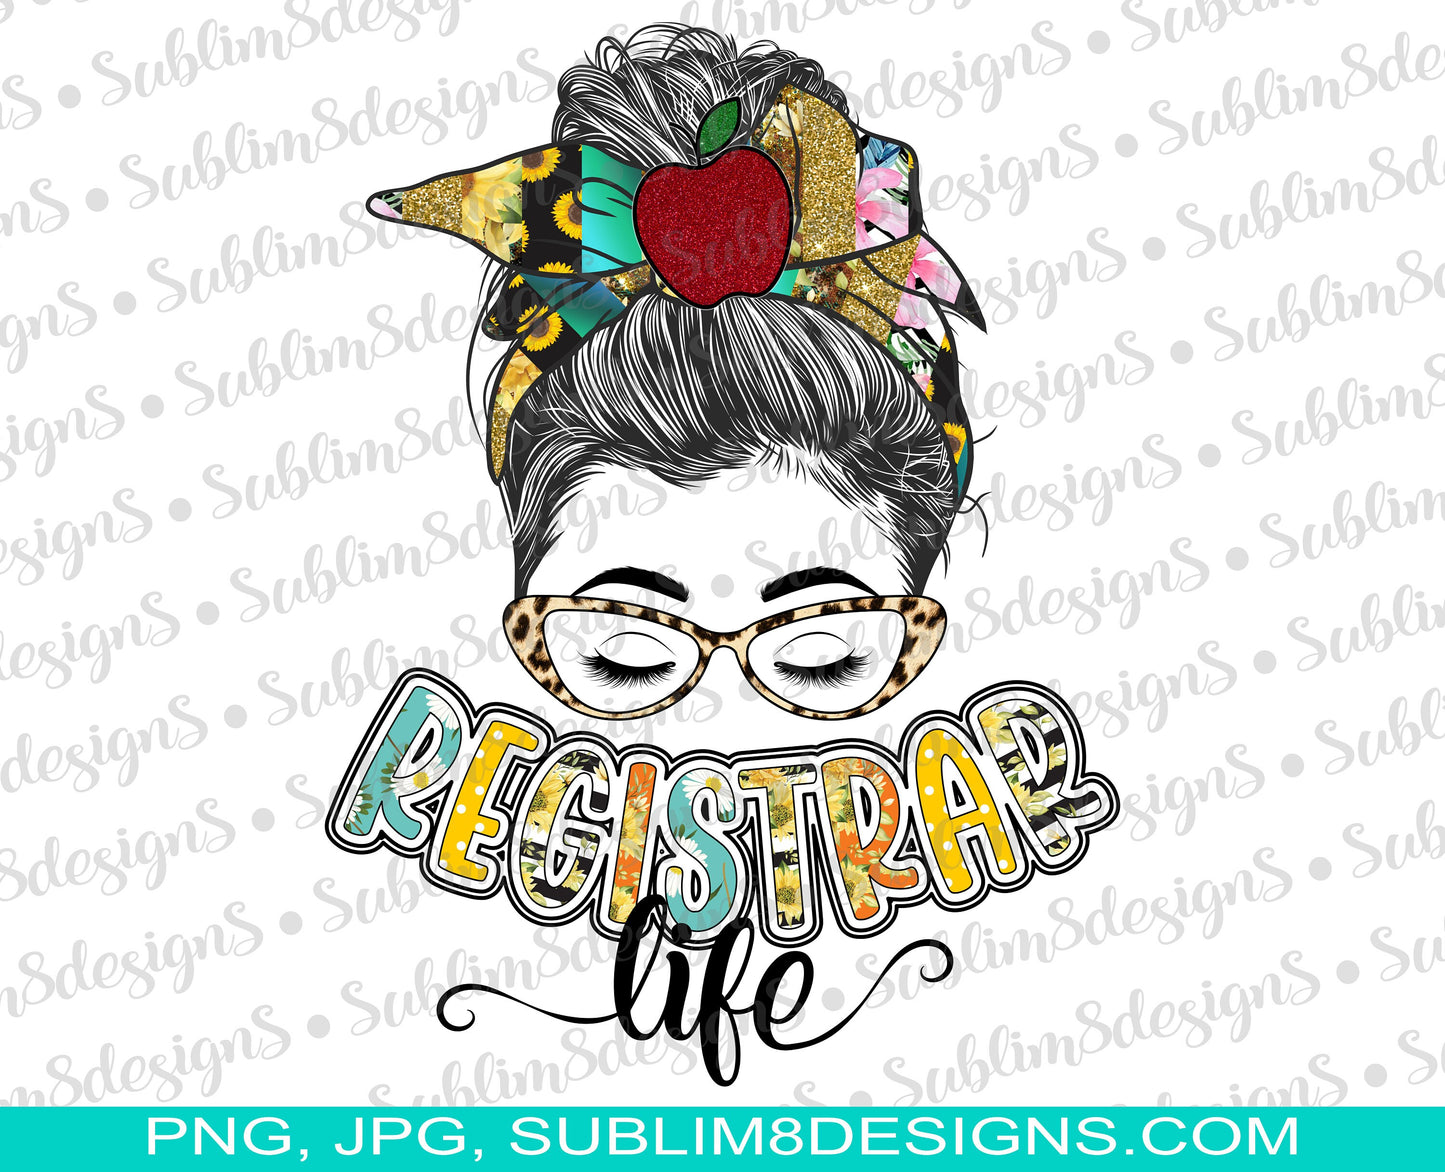 Registrar Life Messy Bun | Registrar Life | Messy Bun | Registrar | Education Design | Sublimation Design PNG and JPG ONLY